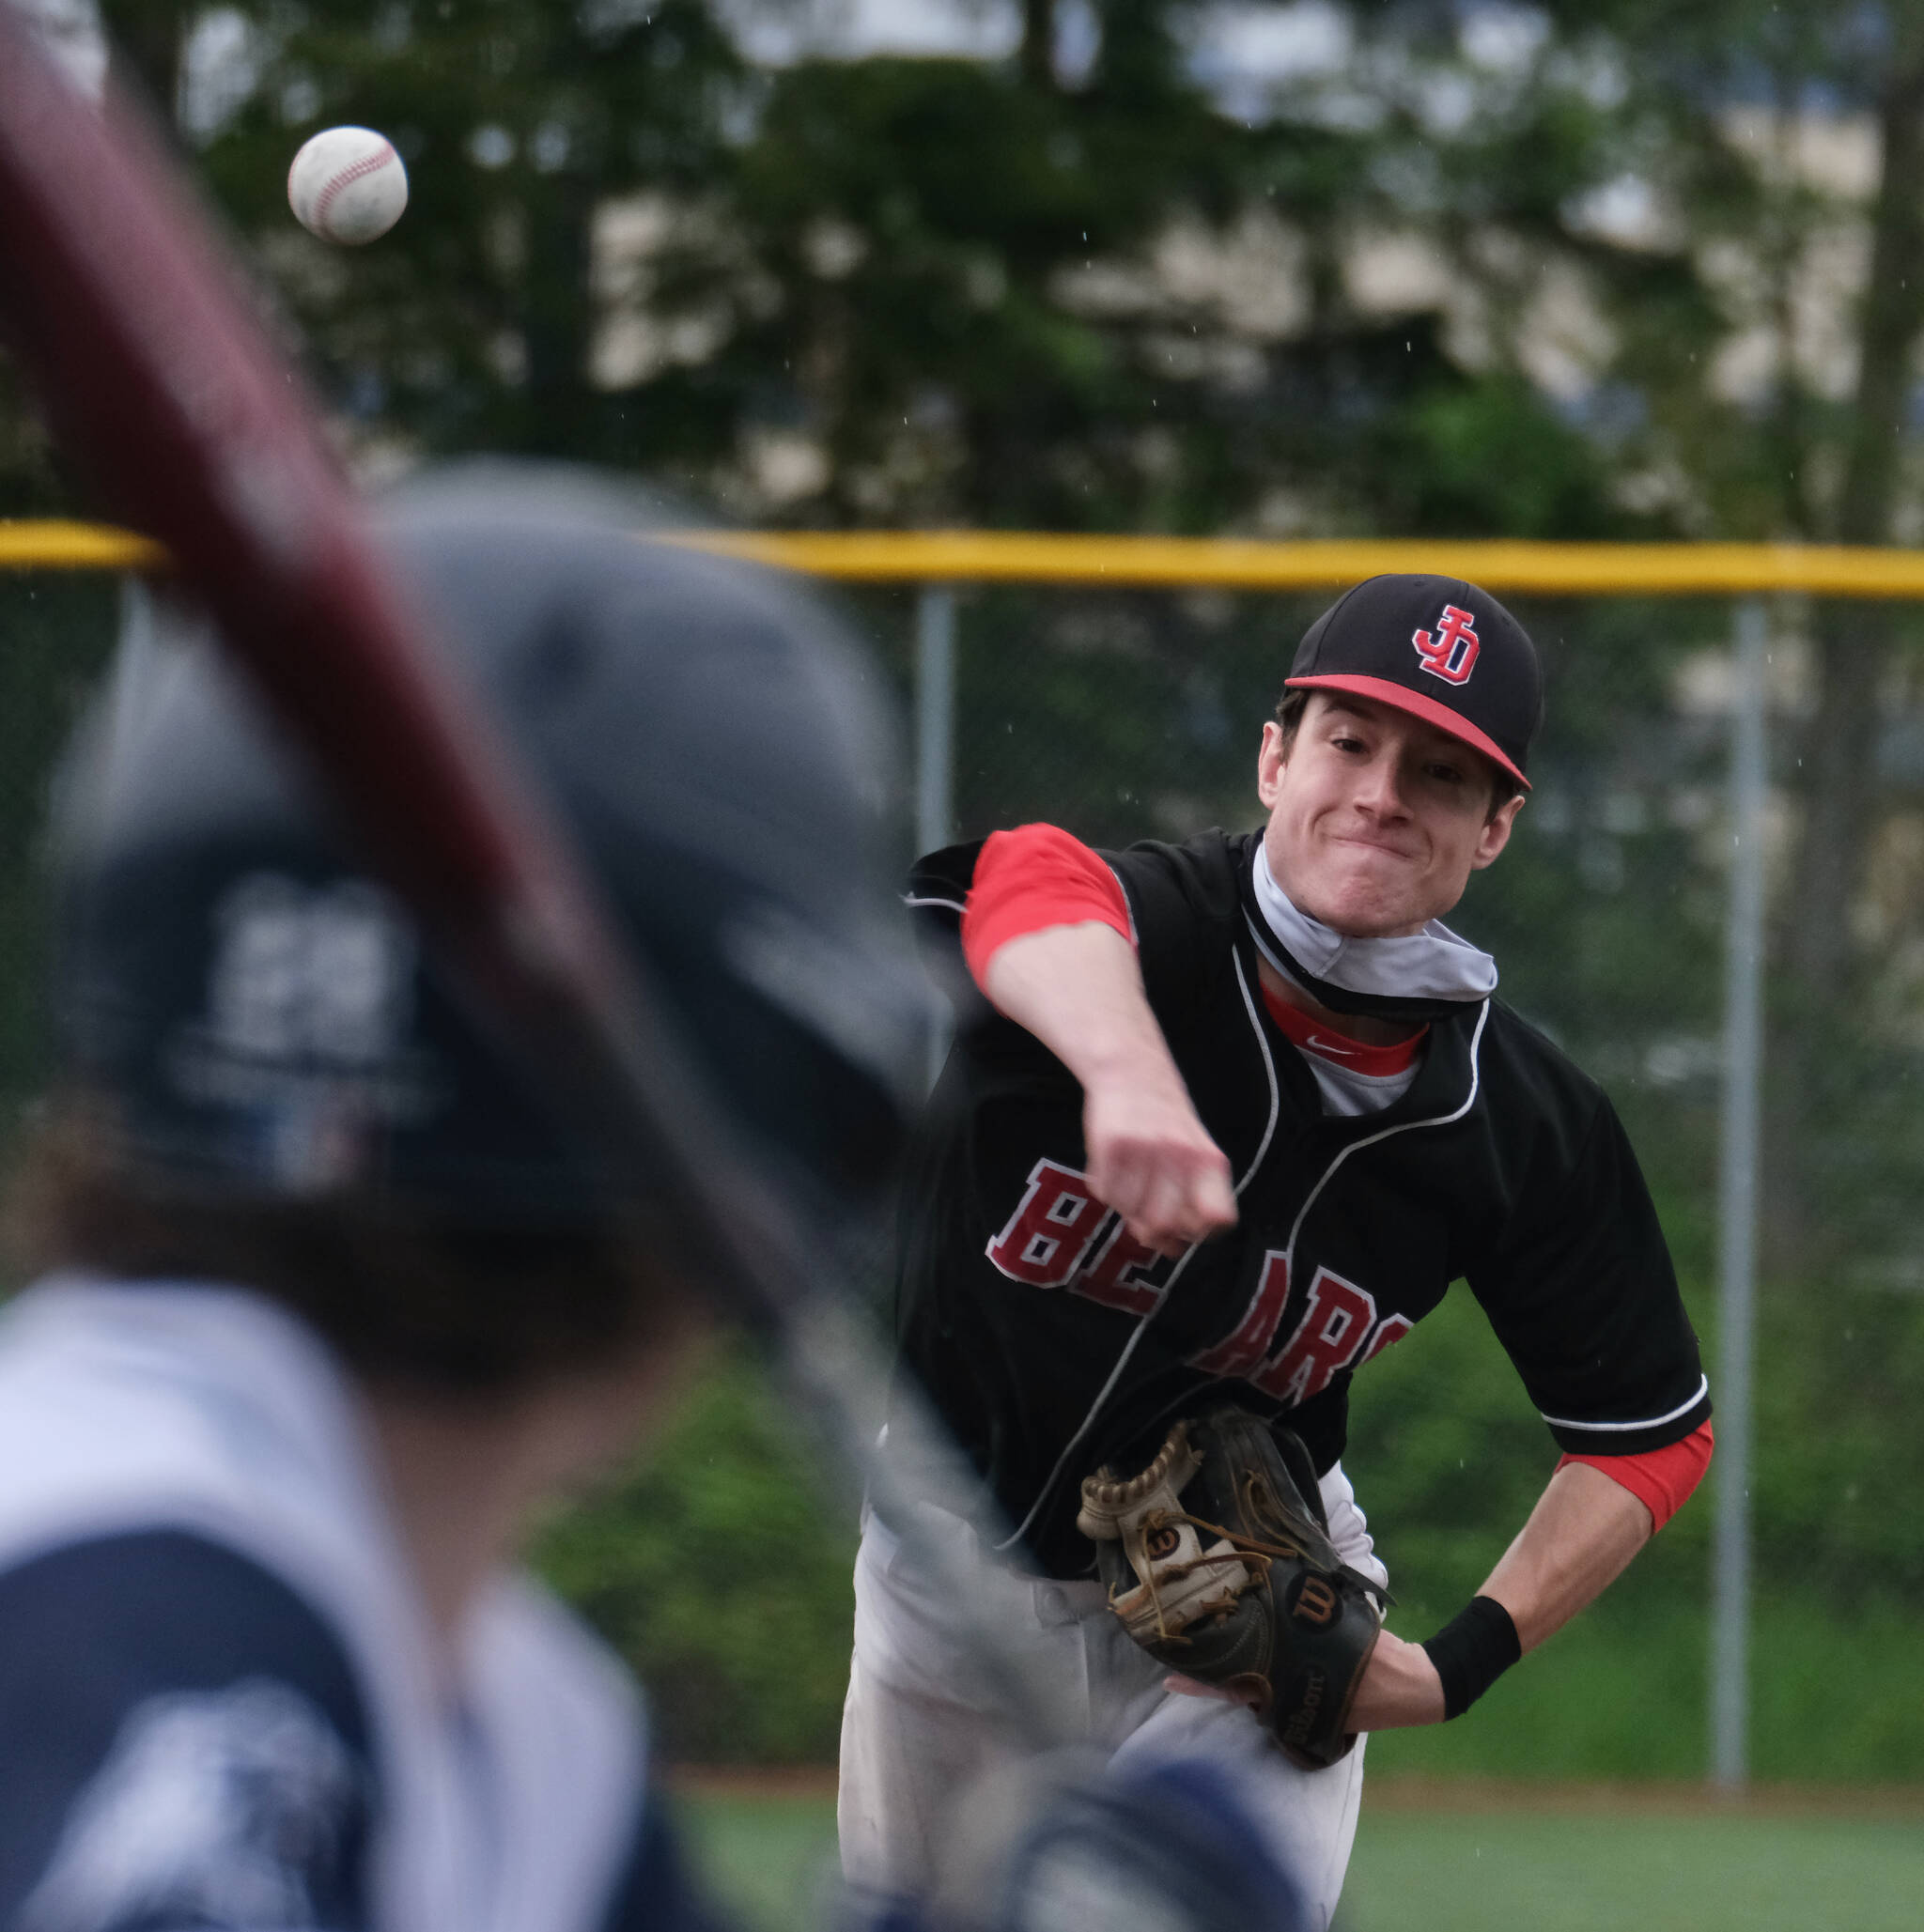 JDHS senior pitcher Eli Crupi delivers against Eagle River during the Crimson Bears 2-1 loss to the Wolves in an elimination game Friday at the ASAA Division I State Baseball Championships on Sitka’s Moller Field. (Klas Stolpe / Juneau Empire)